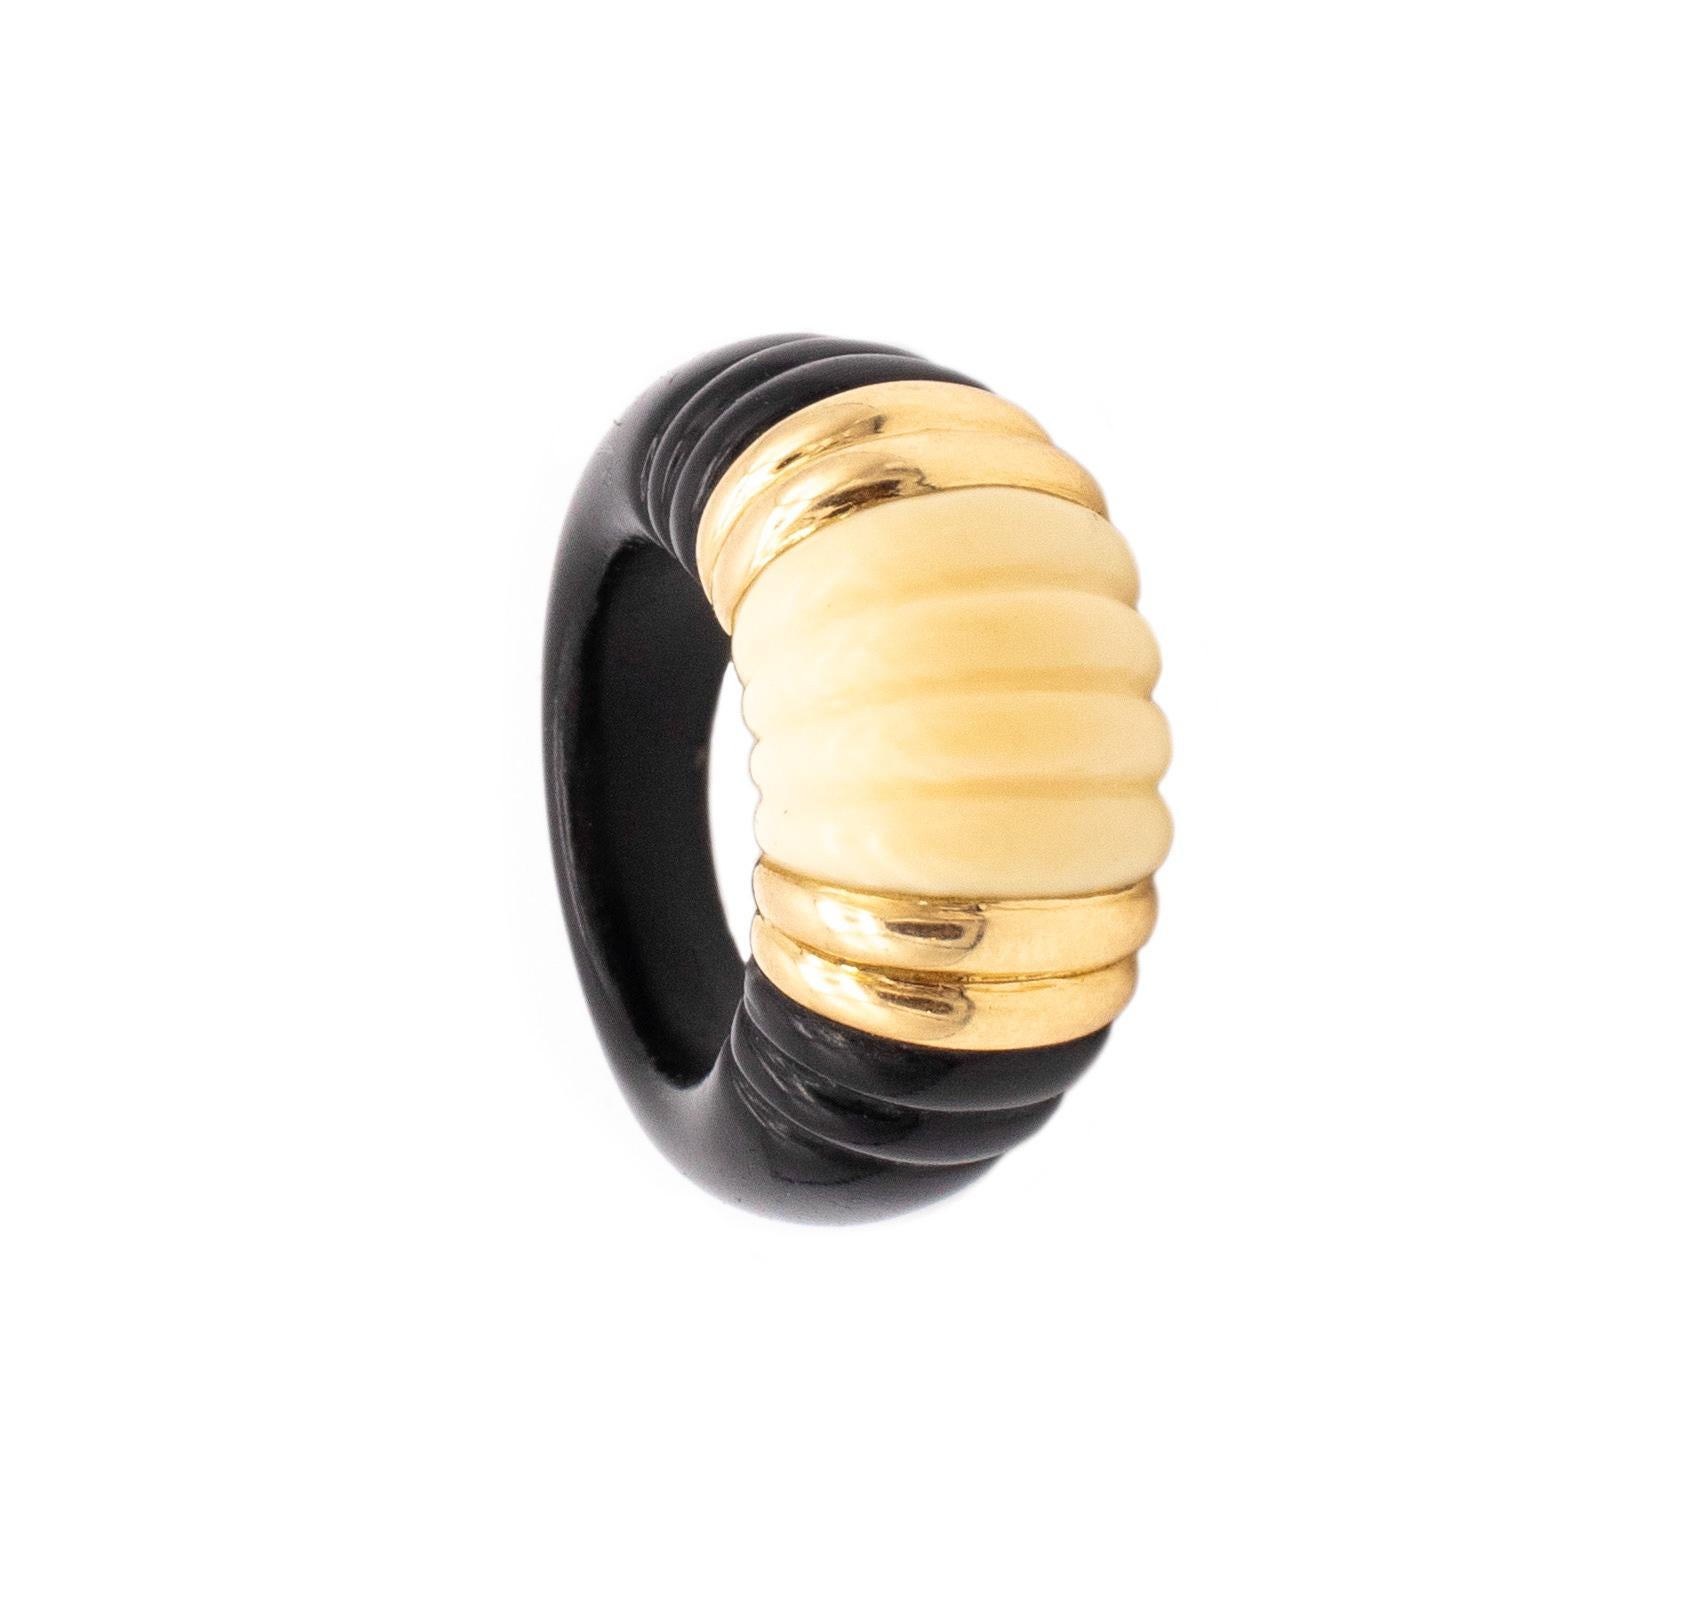 Van Cleef & Arpels 1970 Paris Scalloped Cocktail Ring 18kt Gold with Carvings For Sale 2